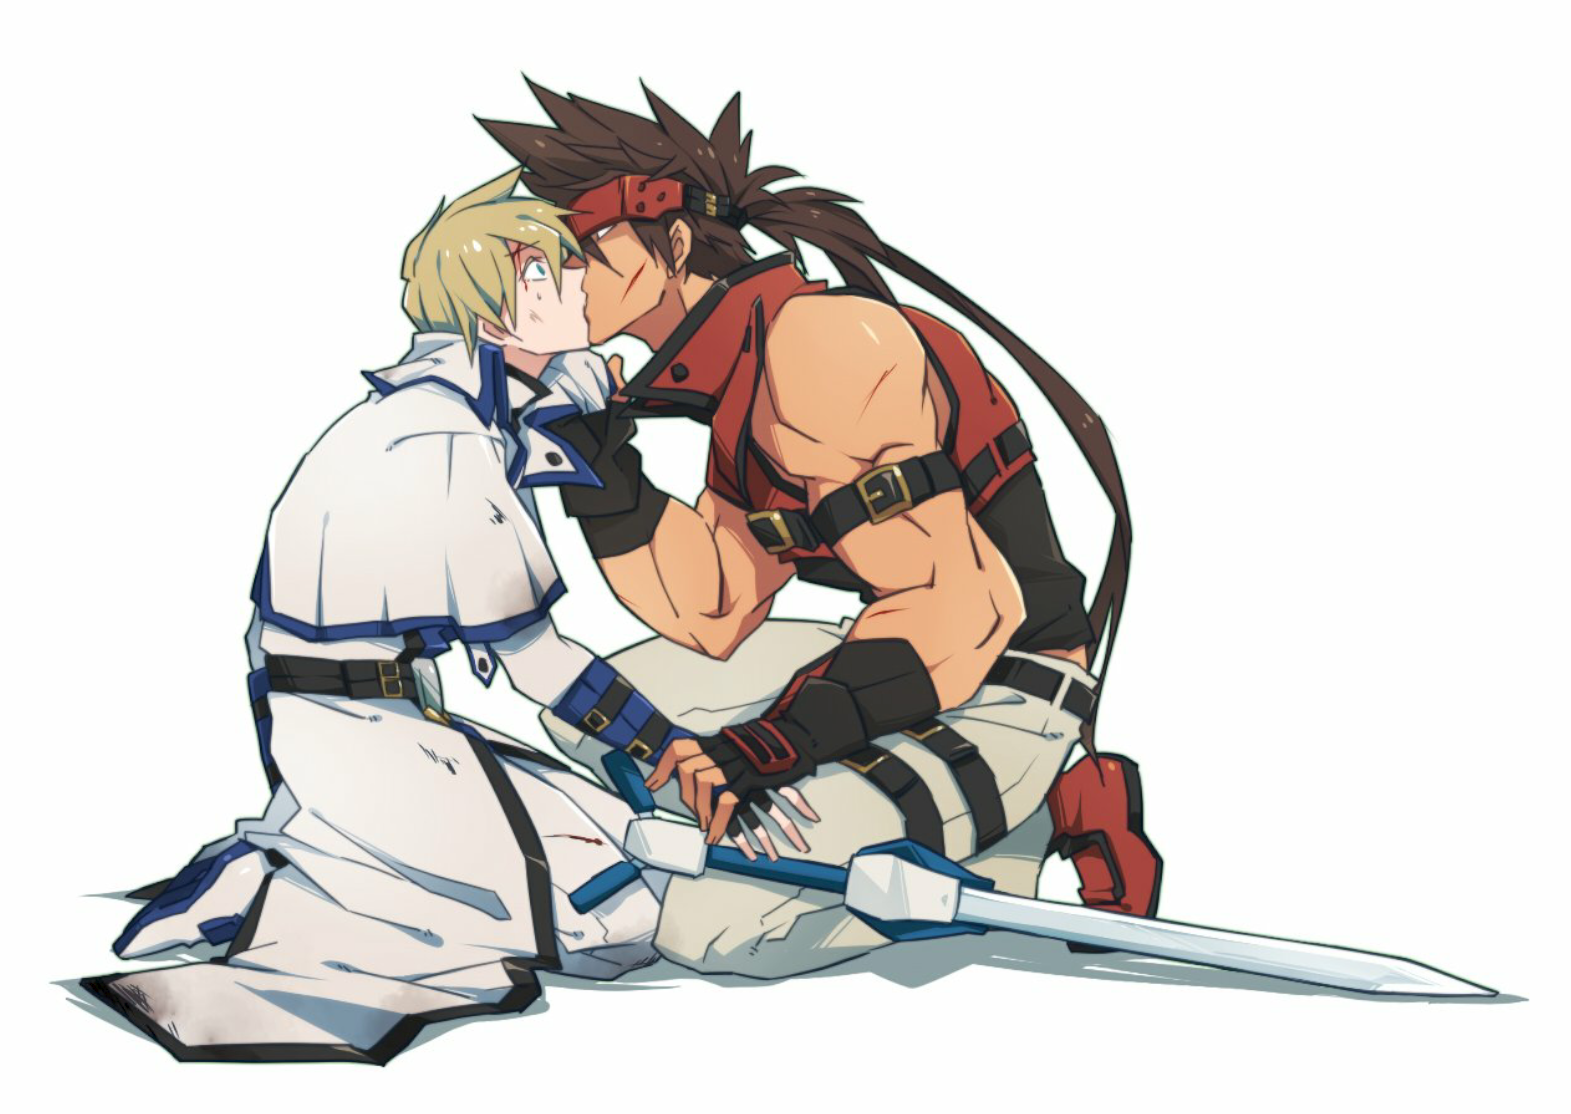 Ky Kiske Sol Badguy Guilty Gear Guilty Gear XX Anime Boys Kissing Fighting Games Anime Games Anime G 1571x1114